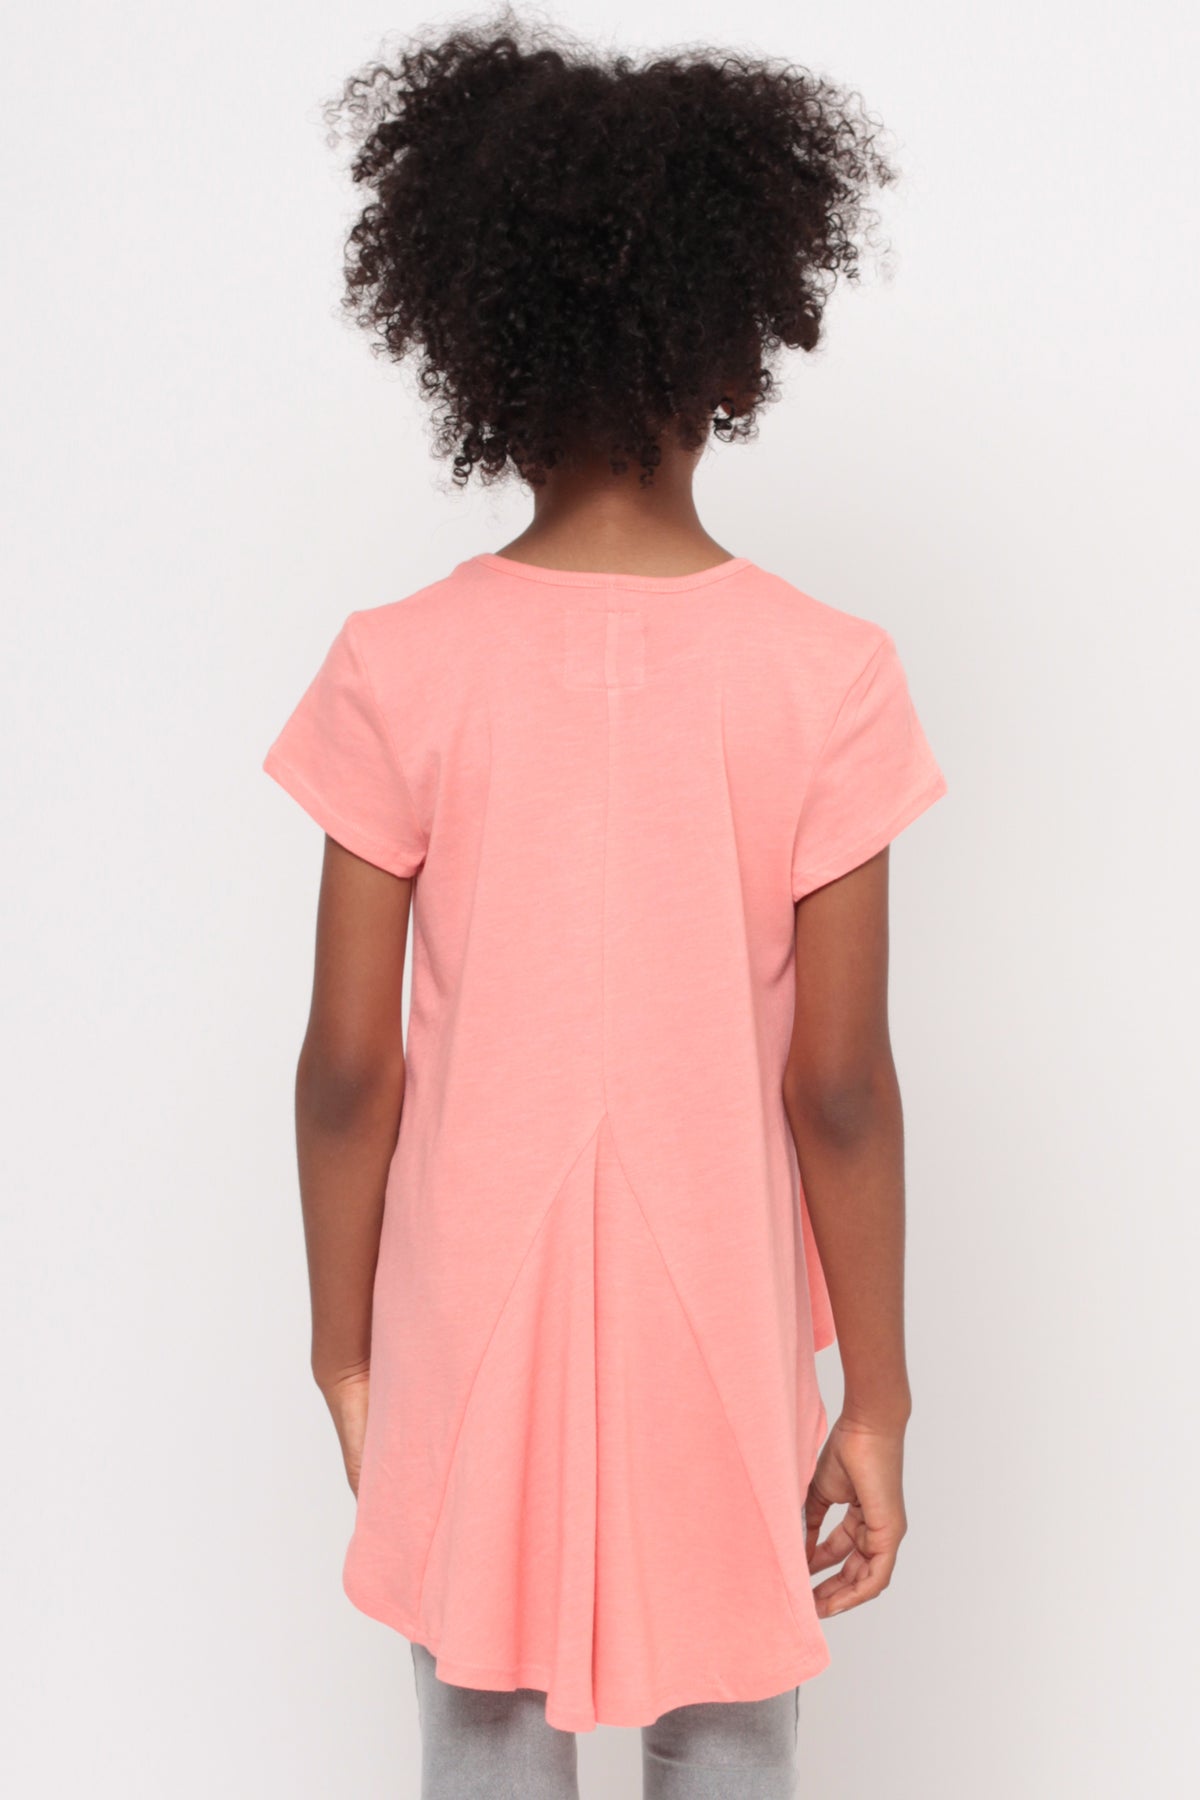 Not Your Average Monkey | Hi-Low Ruffle Back Top - Coral